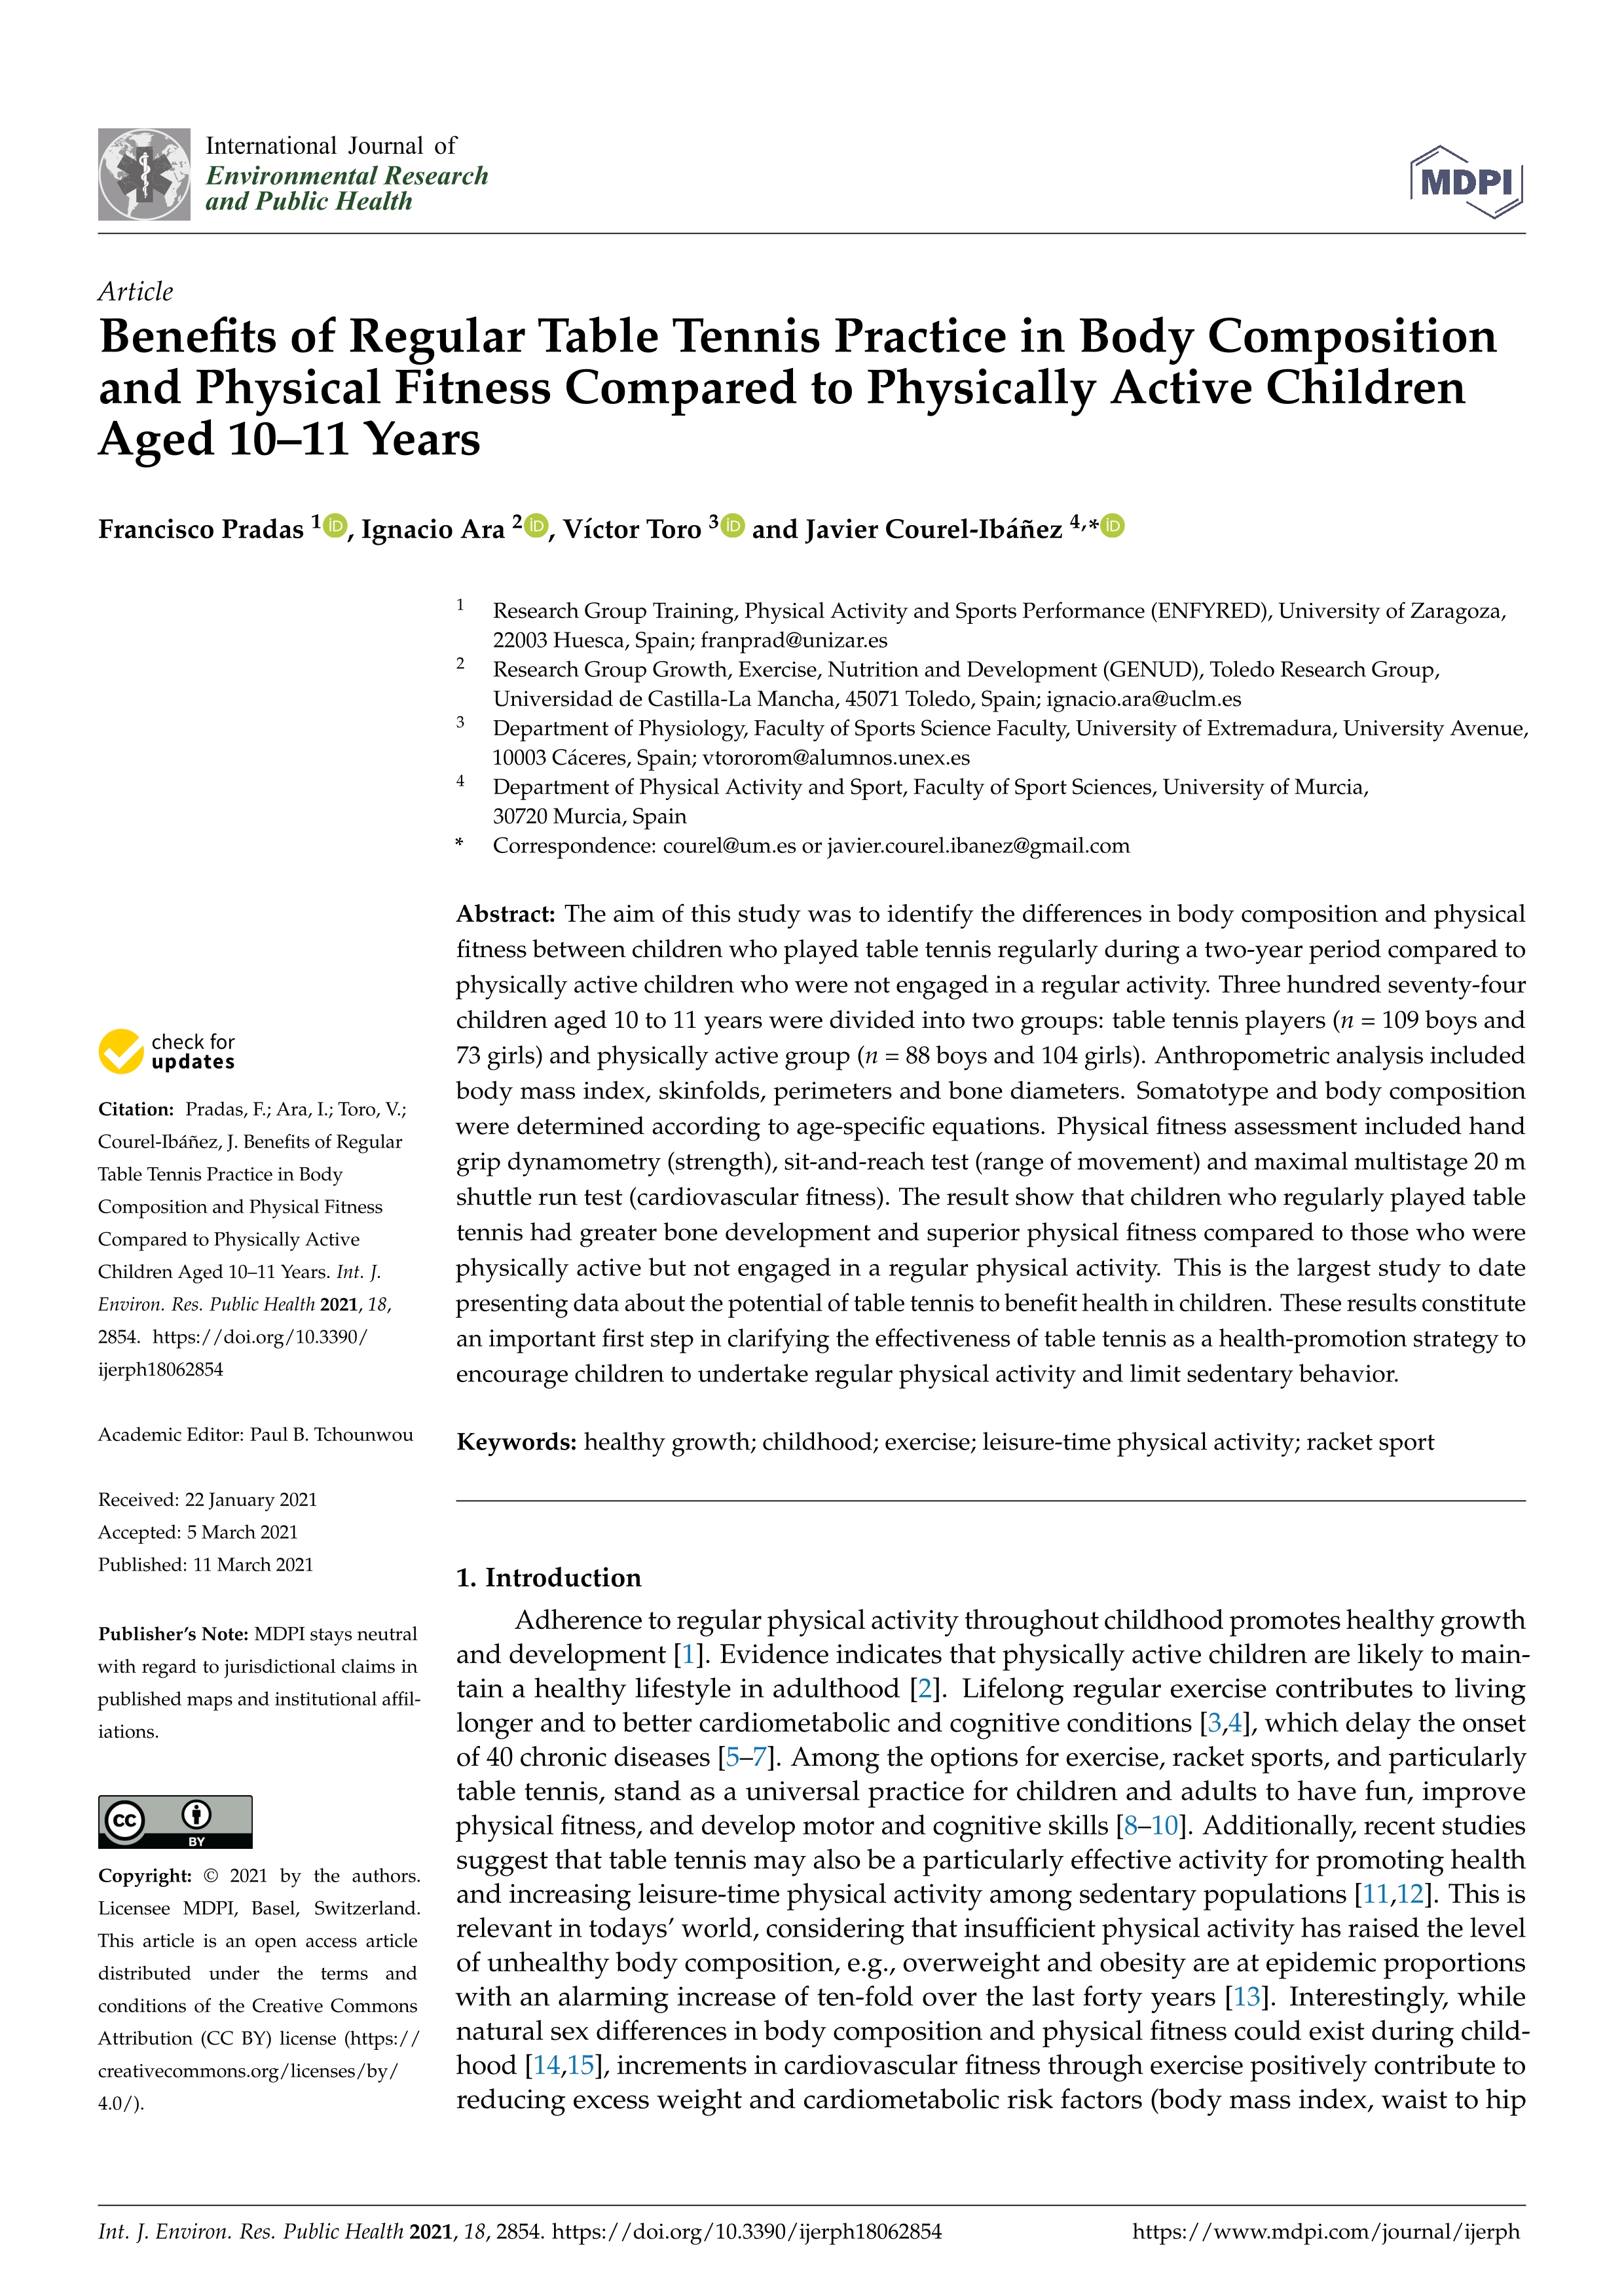 Benefits of regular table tennis practice in body composition and physical fitness compared to physically active children aged 10–11 years